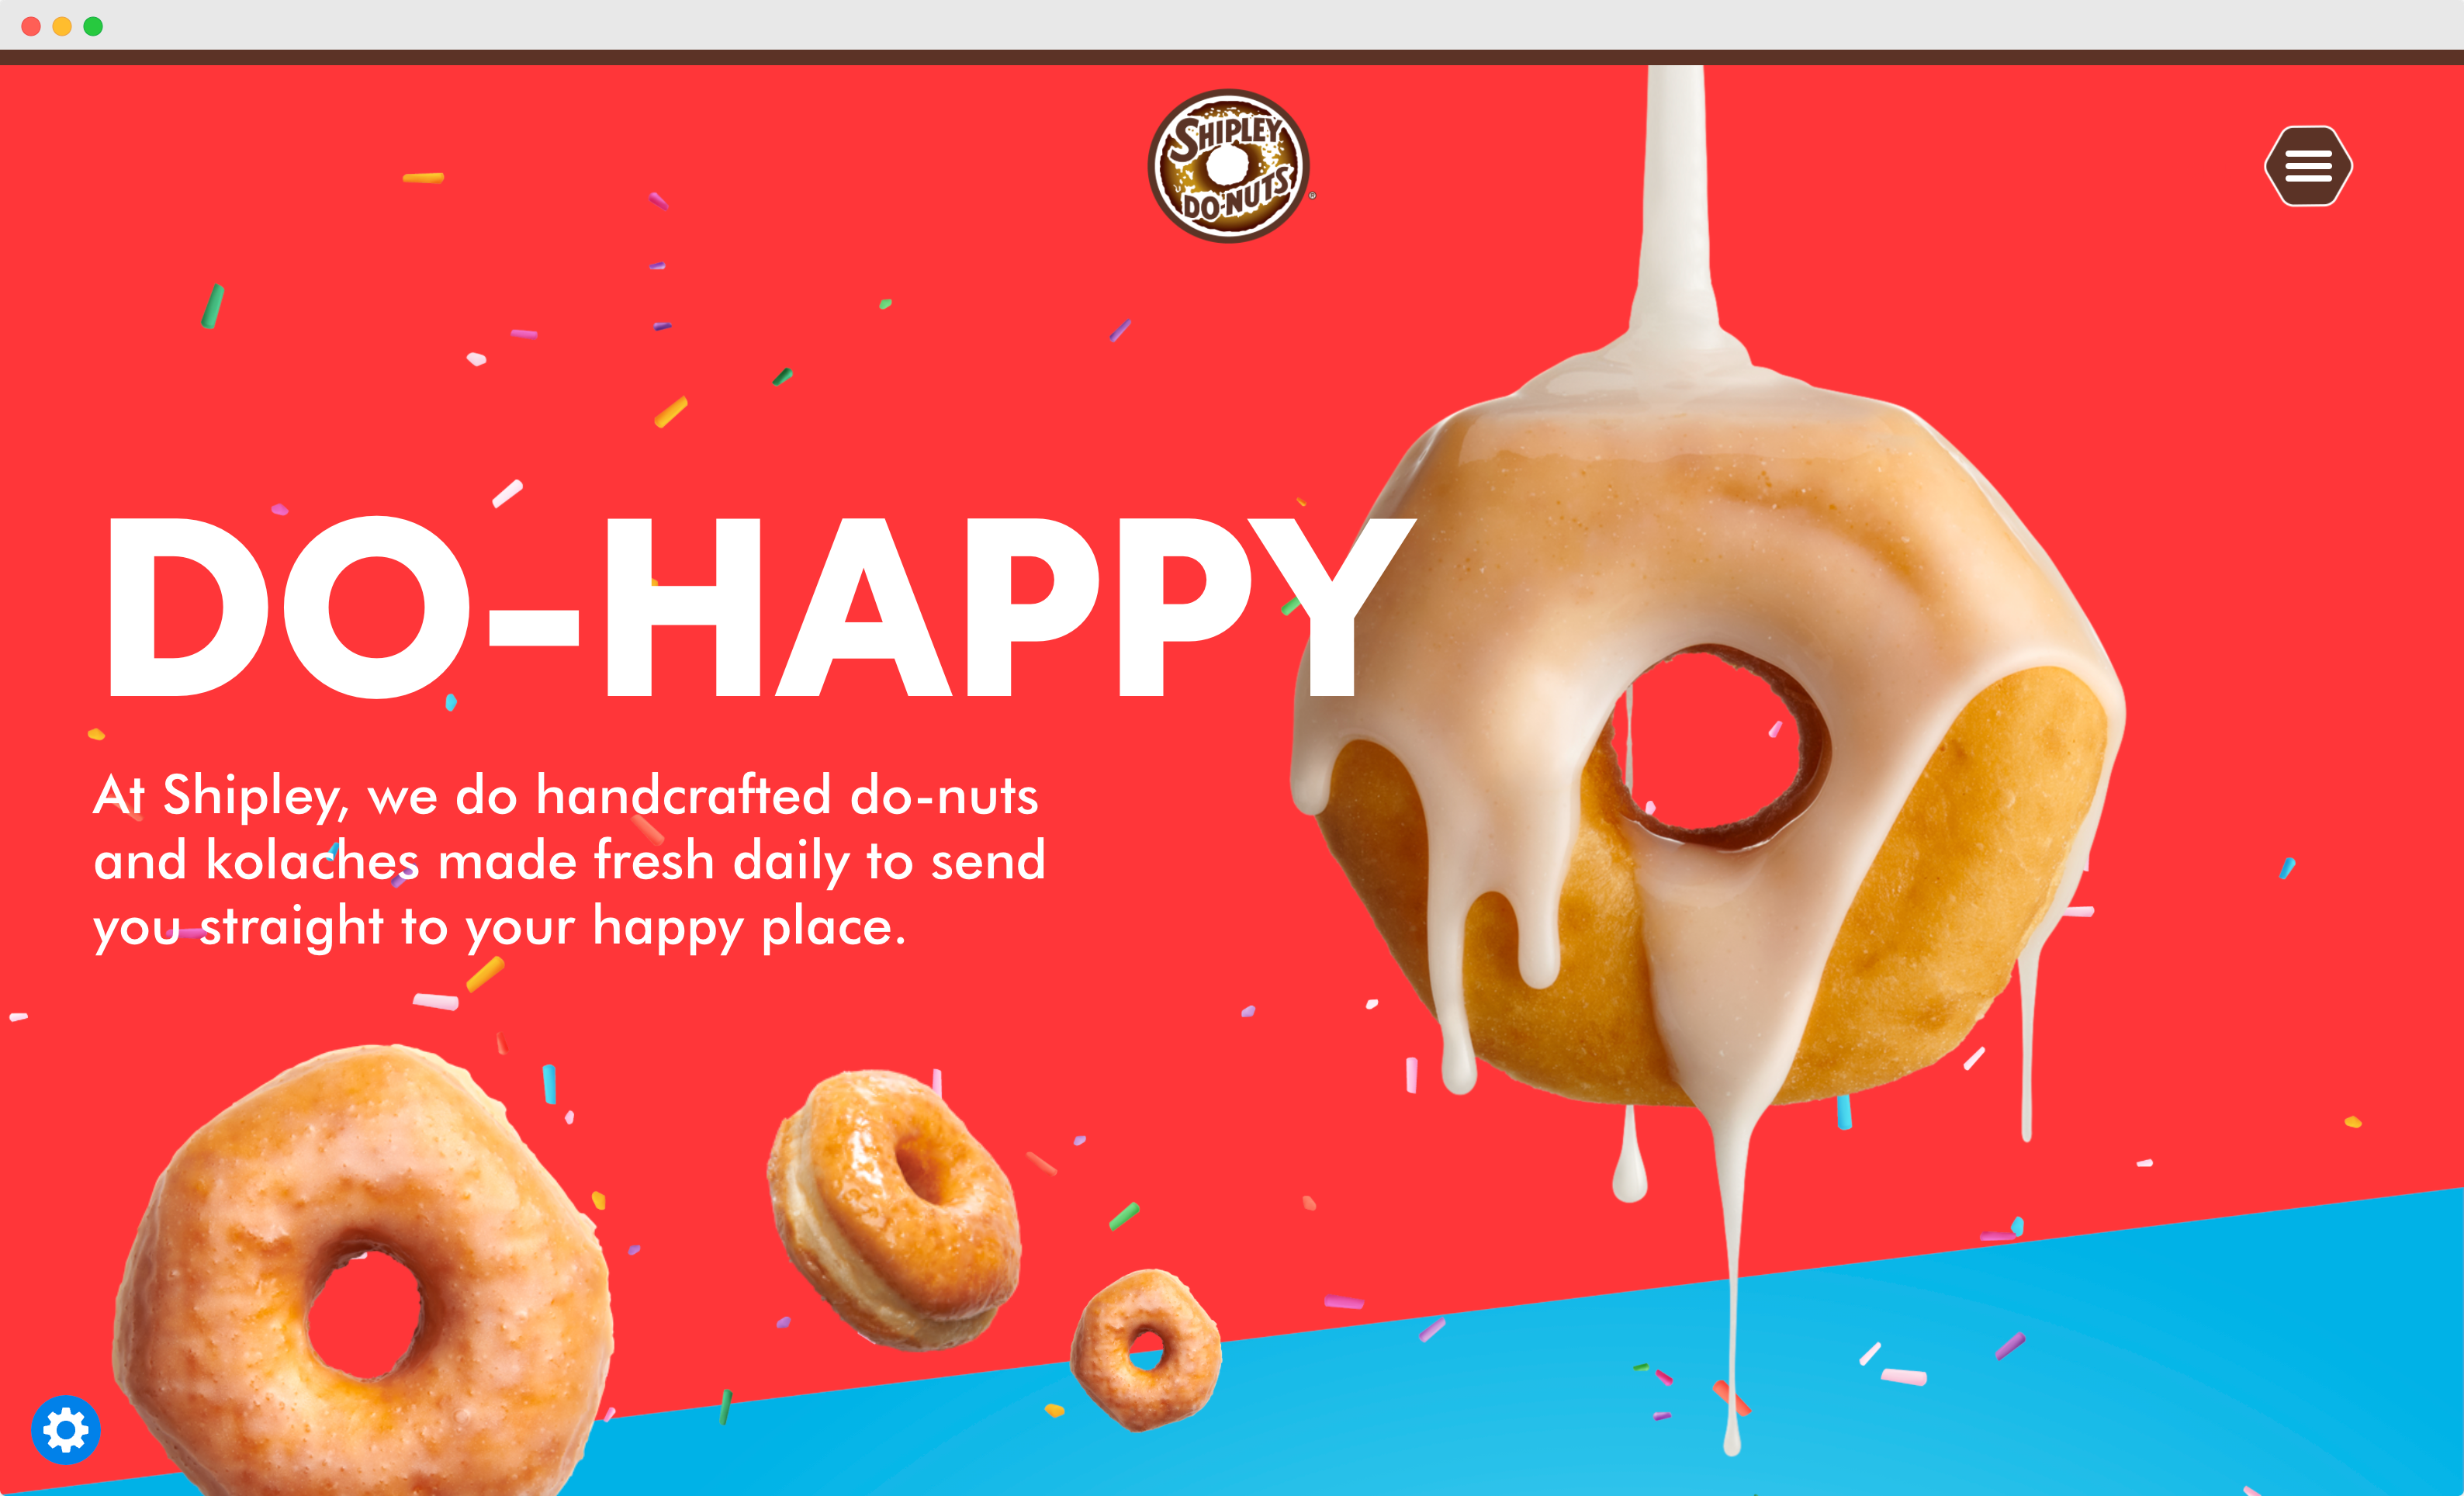 Shipley donuts - Featured image